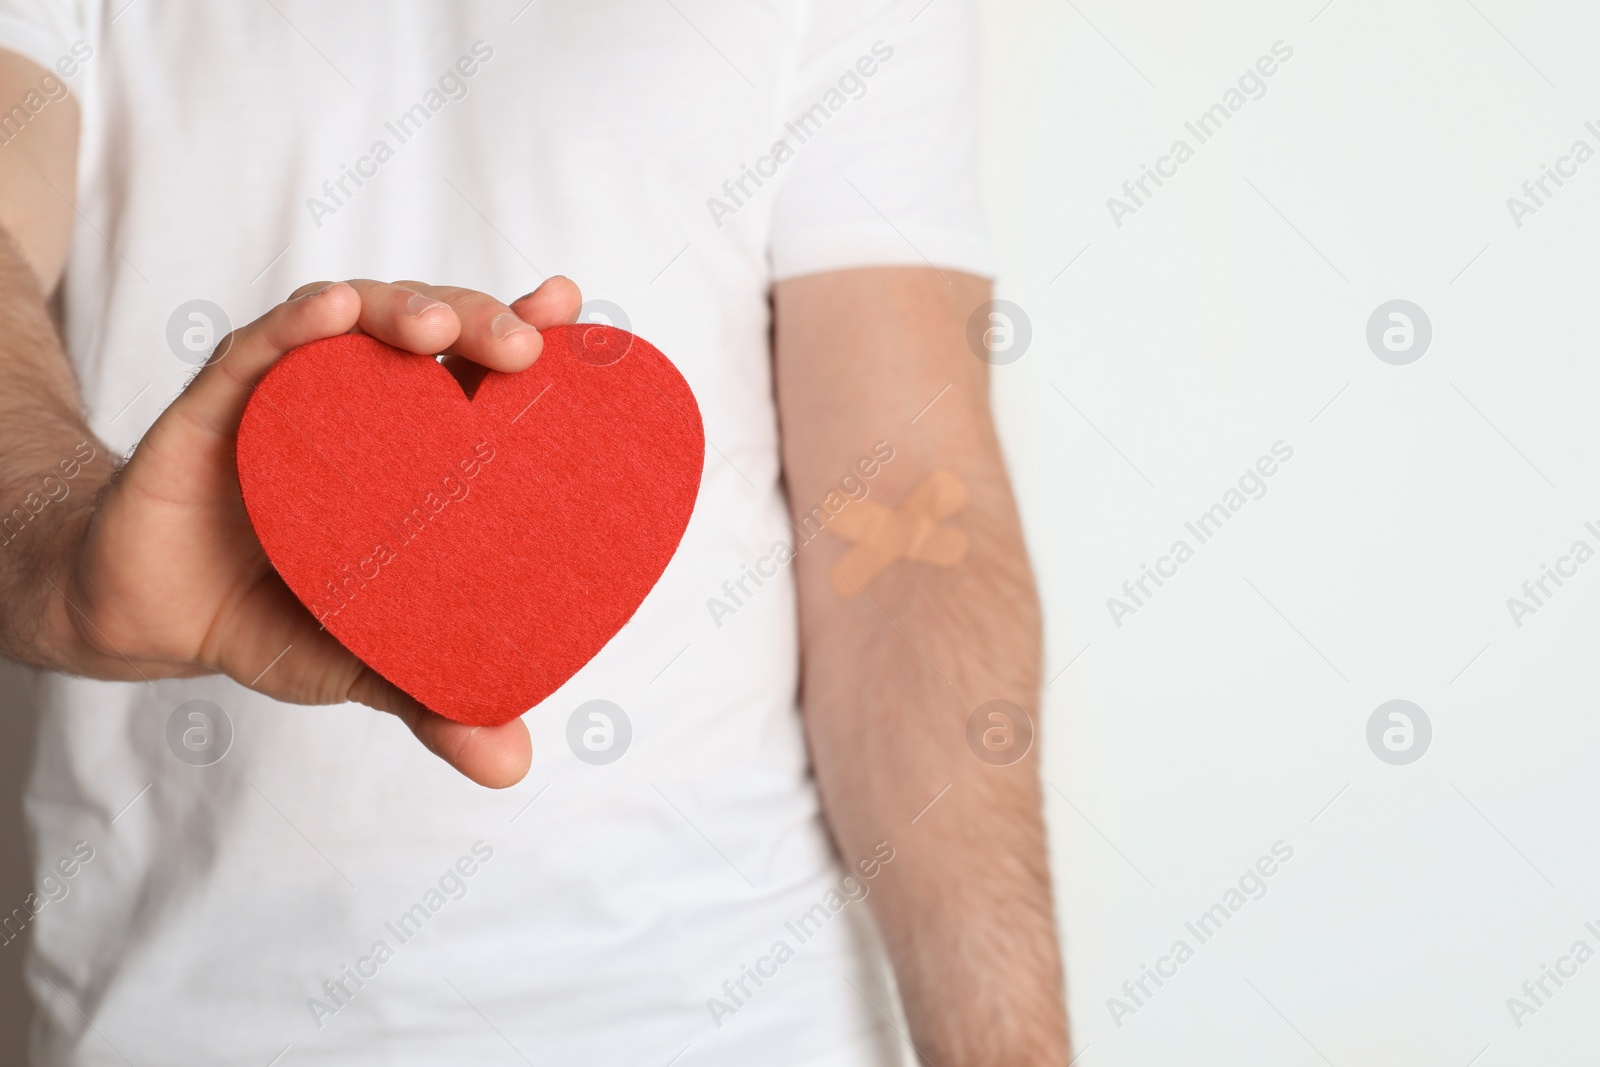 Photo of Man holding fabric heart near hand with adhesive plasters against white background, closeup. Blood donation concept